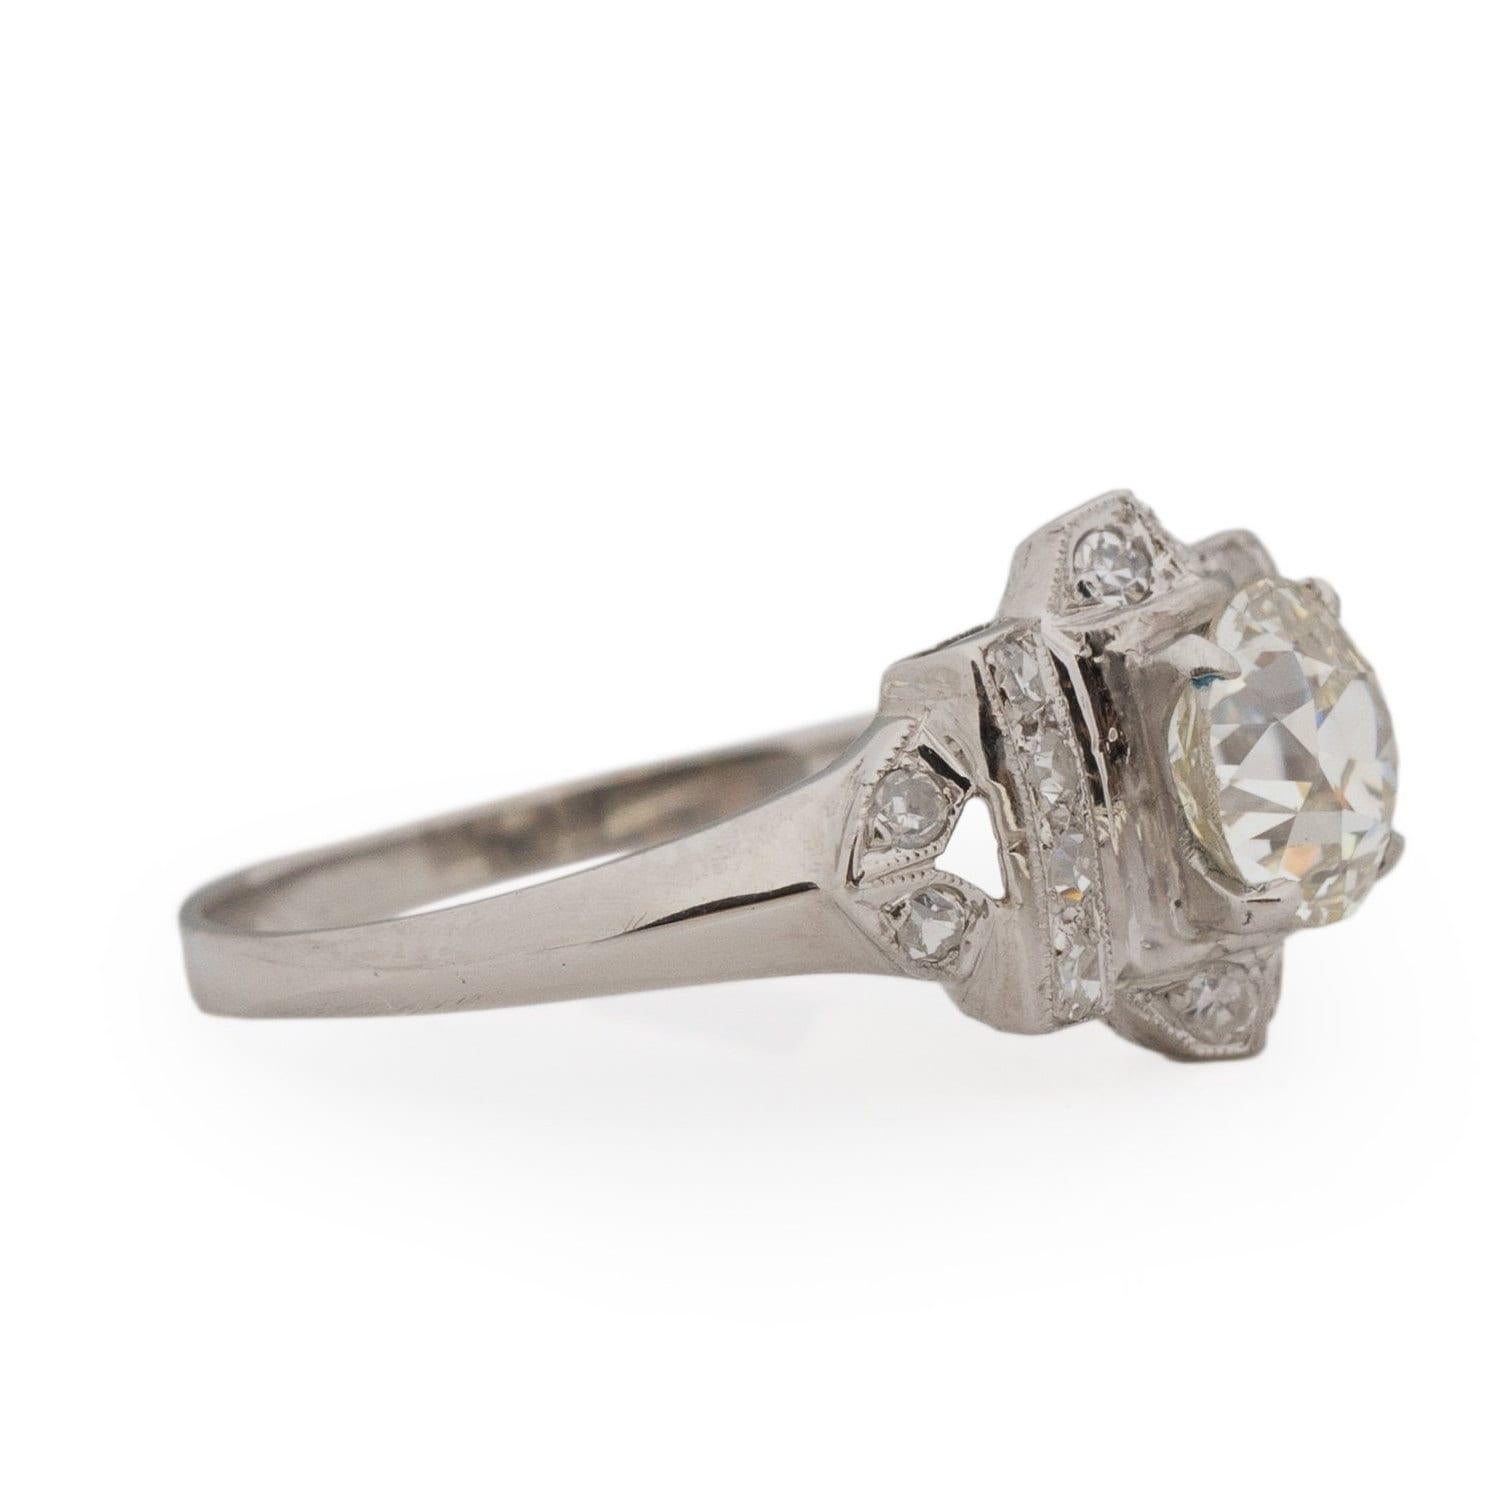 Circa 1901 Edwardian Platinum GIA Certified 1.03 Ct Old European Cut Vintage In Good Condition For Sale In Addison, TX